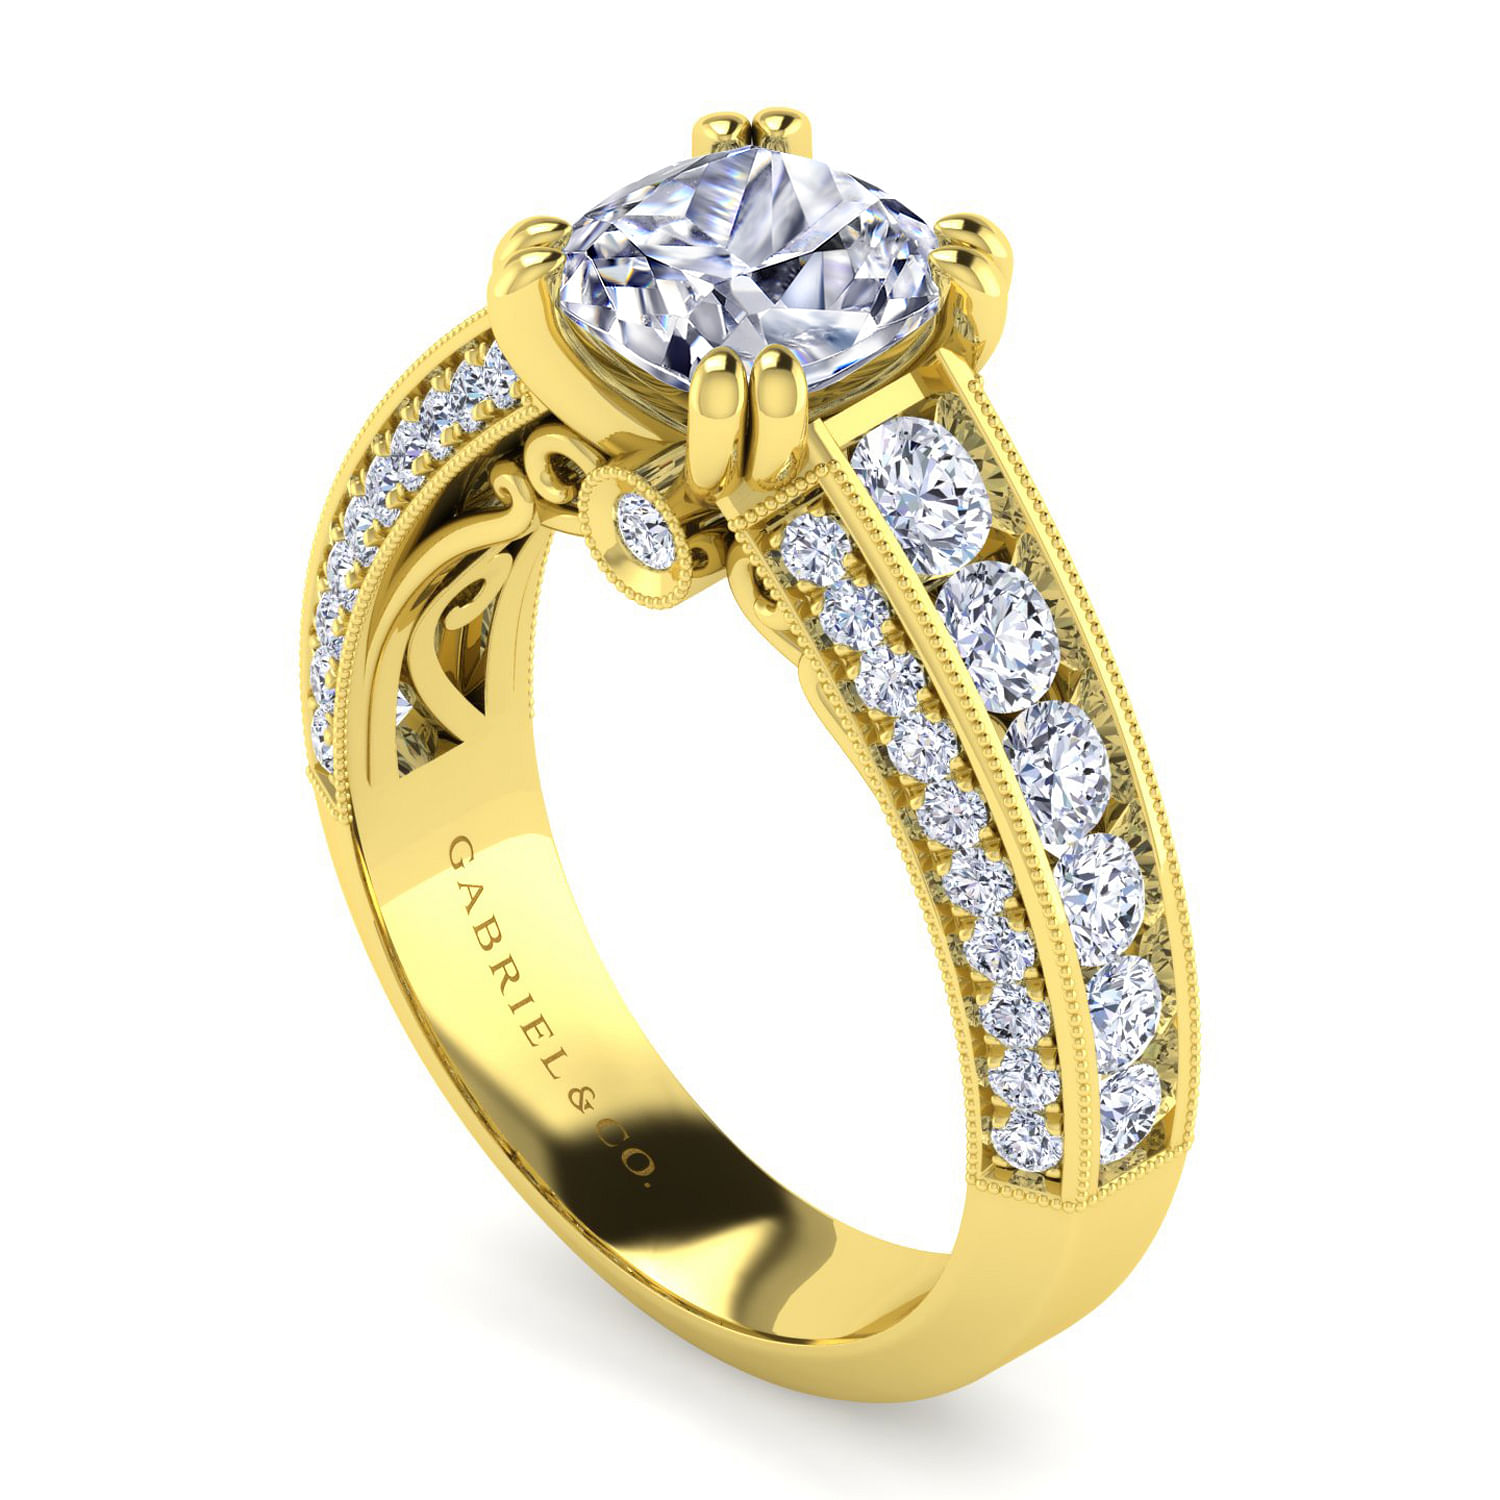 Vintage Inspired 14K Yellow Gold Wide Band Cushion Cut Diamond Engagement Ring